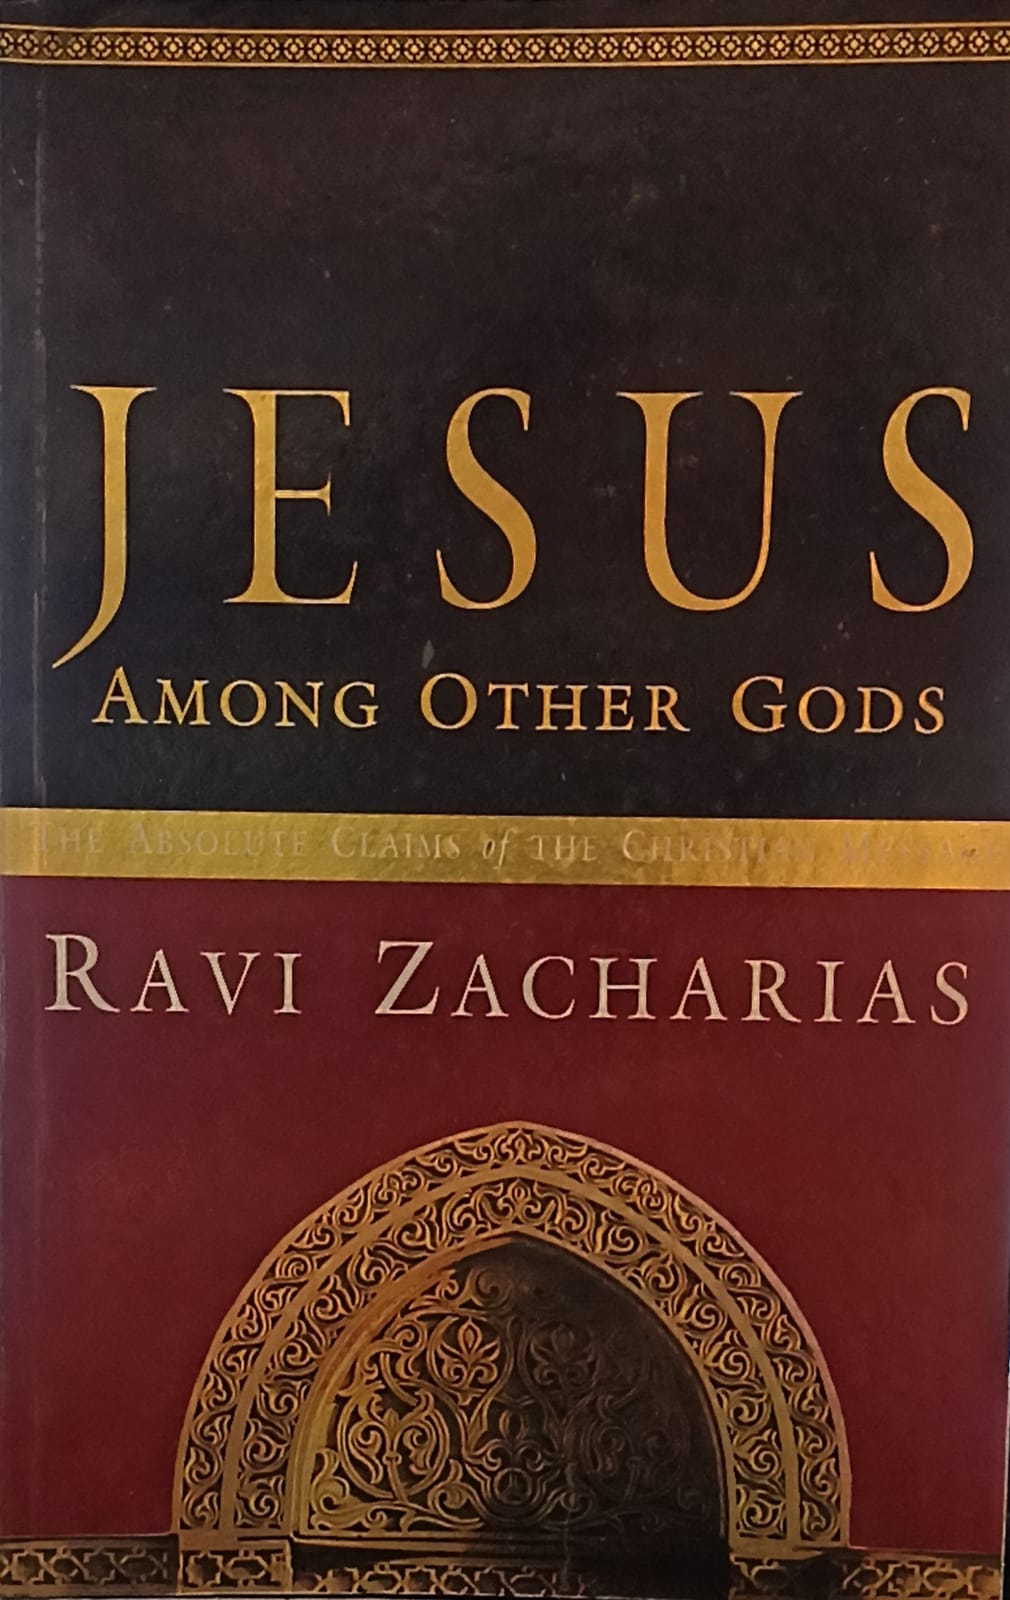 Jesus Among Other Gods: The Absolute Claims of the Christian Message (RARE BOOKS)